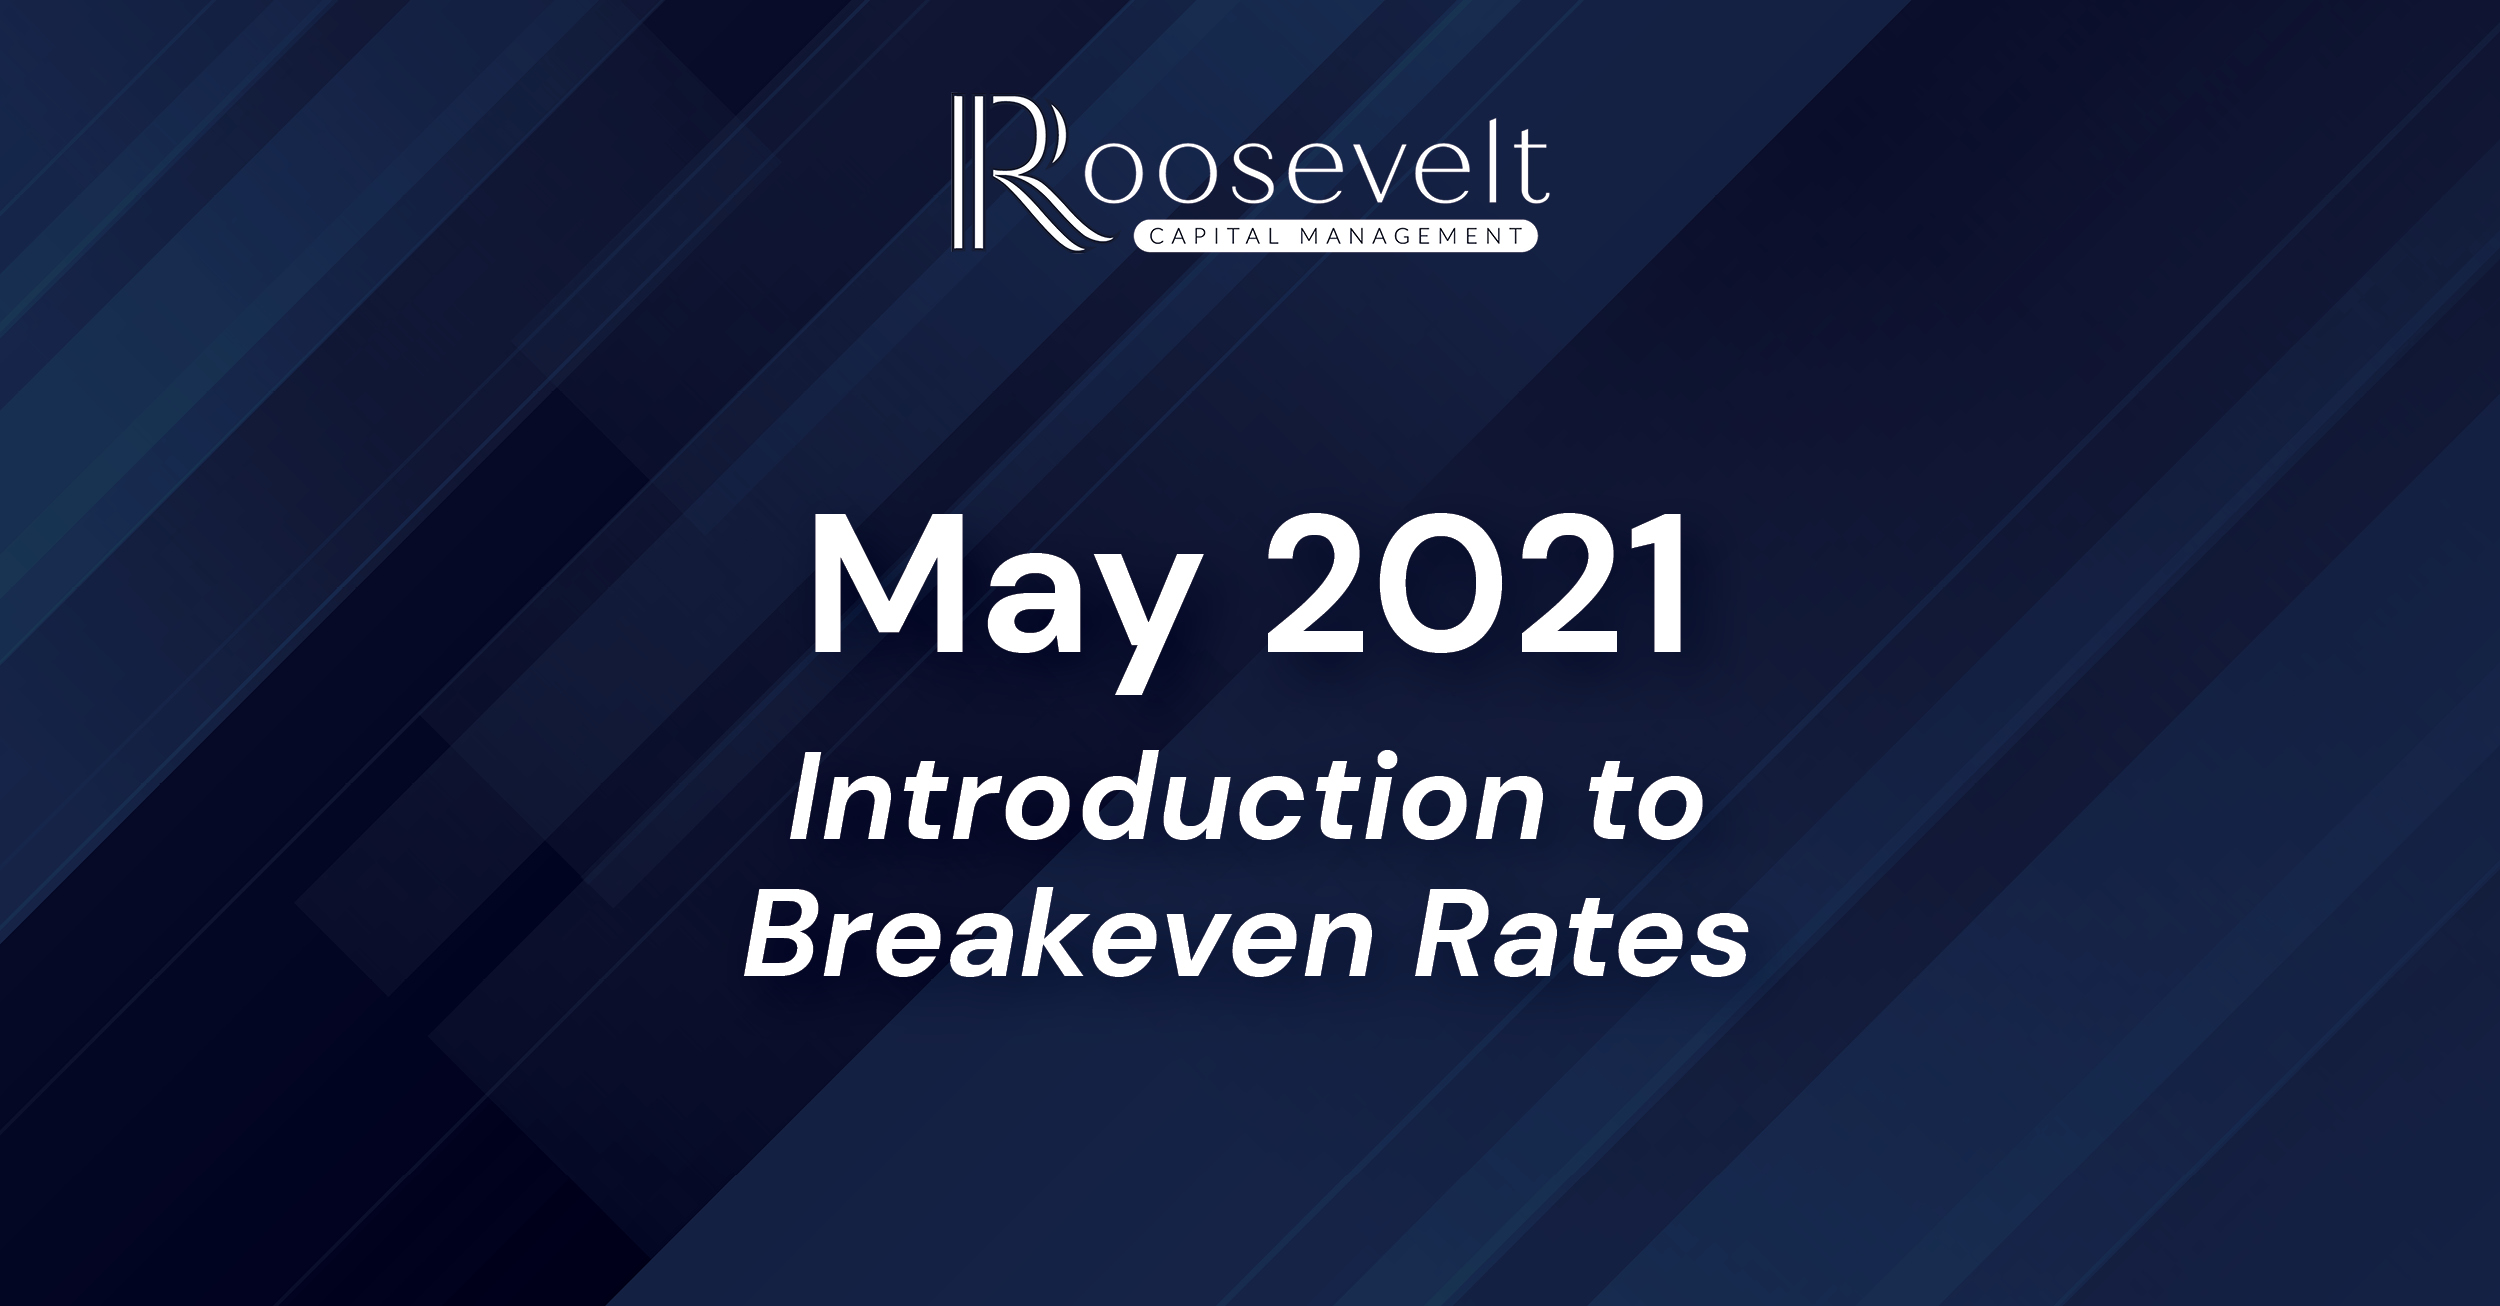 May 2021 - Introduction to Breakeven Rates